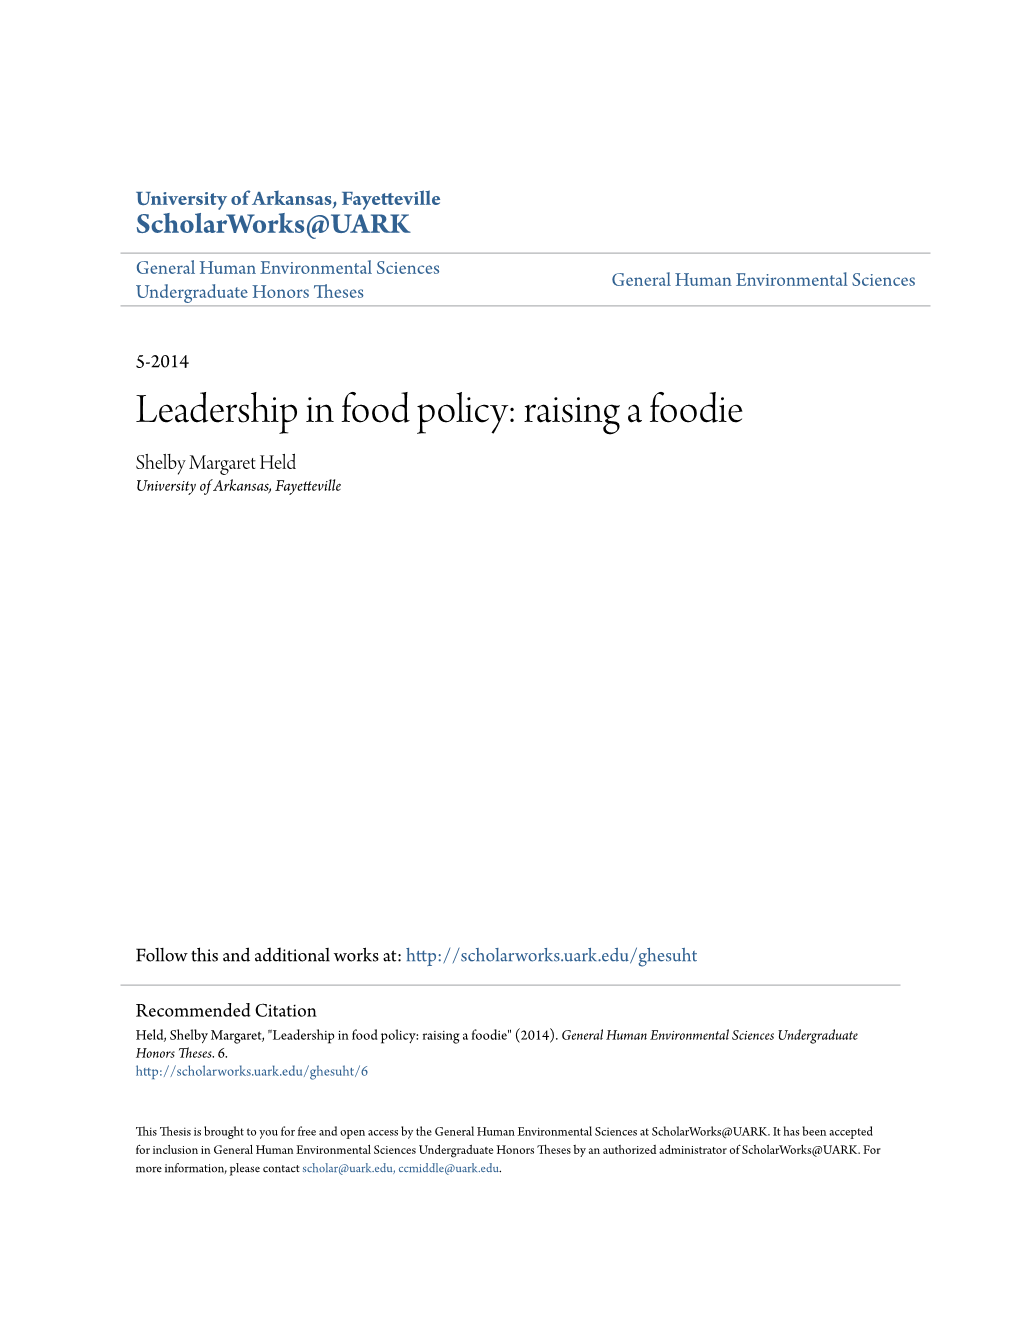 Leadership in Food Policy: Raising a Foodie Shelby Margaret Held University of Arkansas, Fayetteville